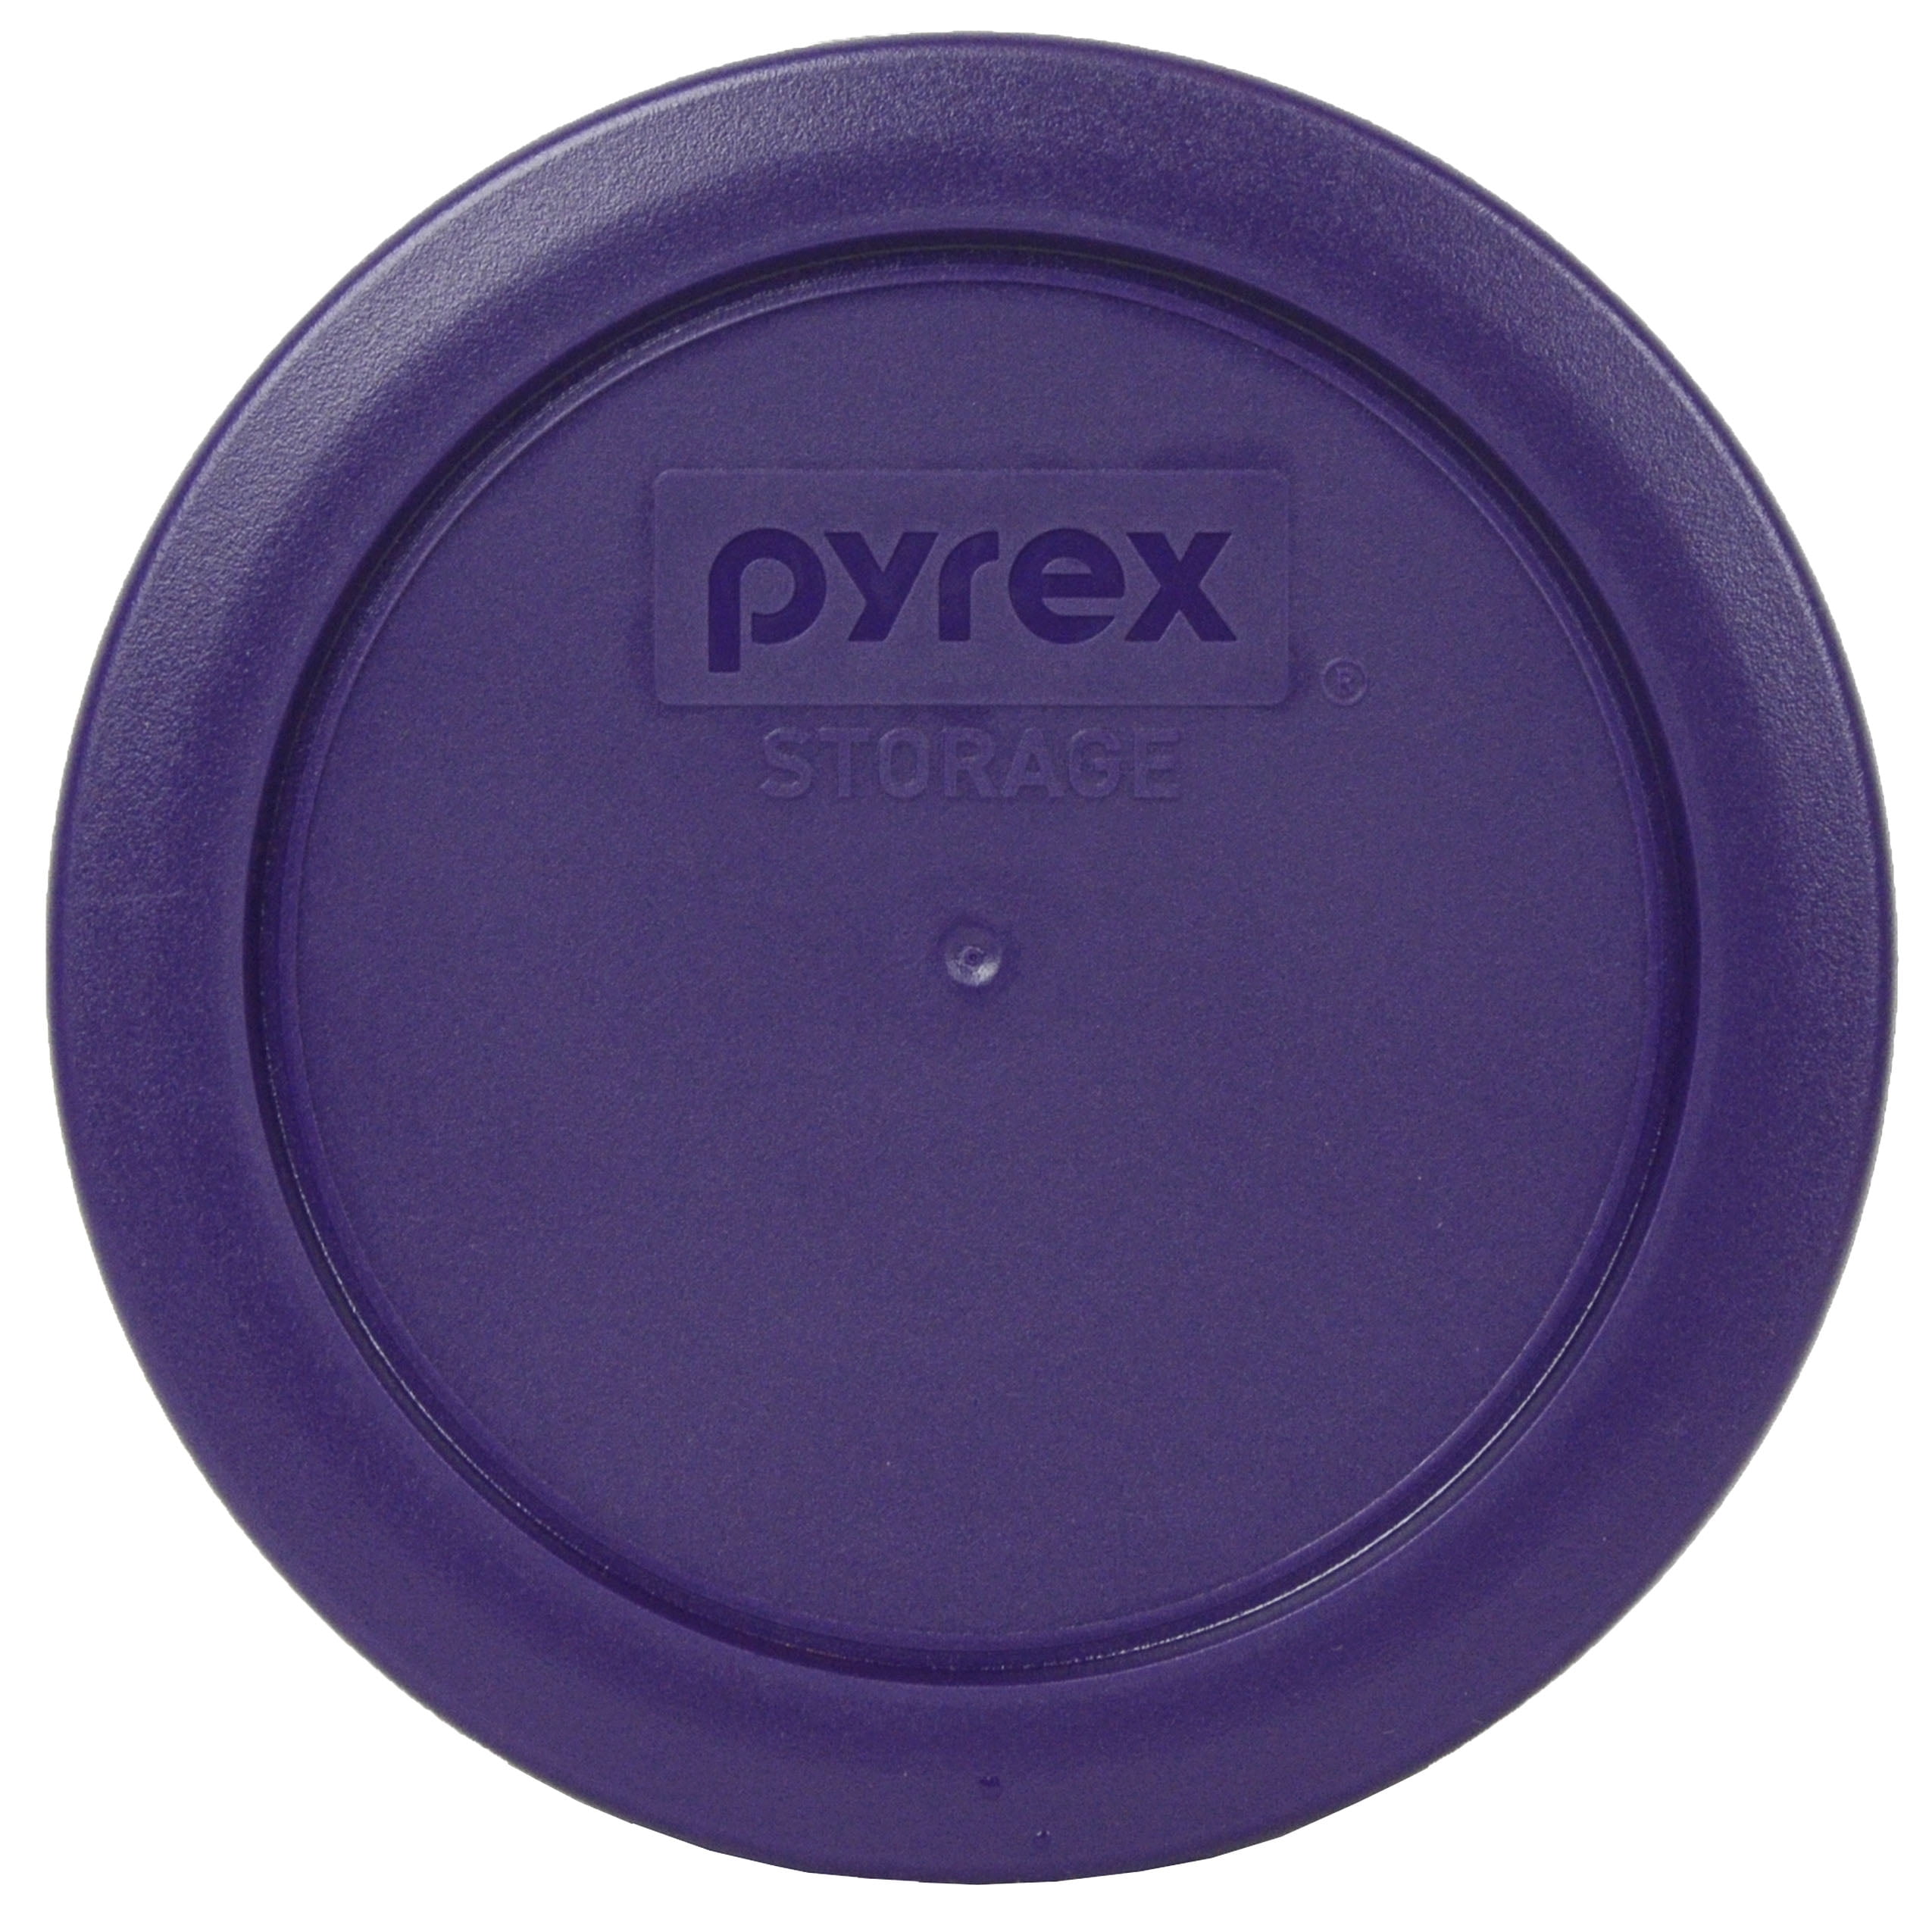 Pyrex 7200PC Plum Purple 5in. Round Plastic Storage Replacement Lid Cover